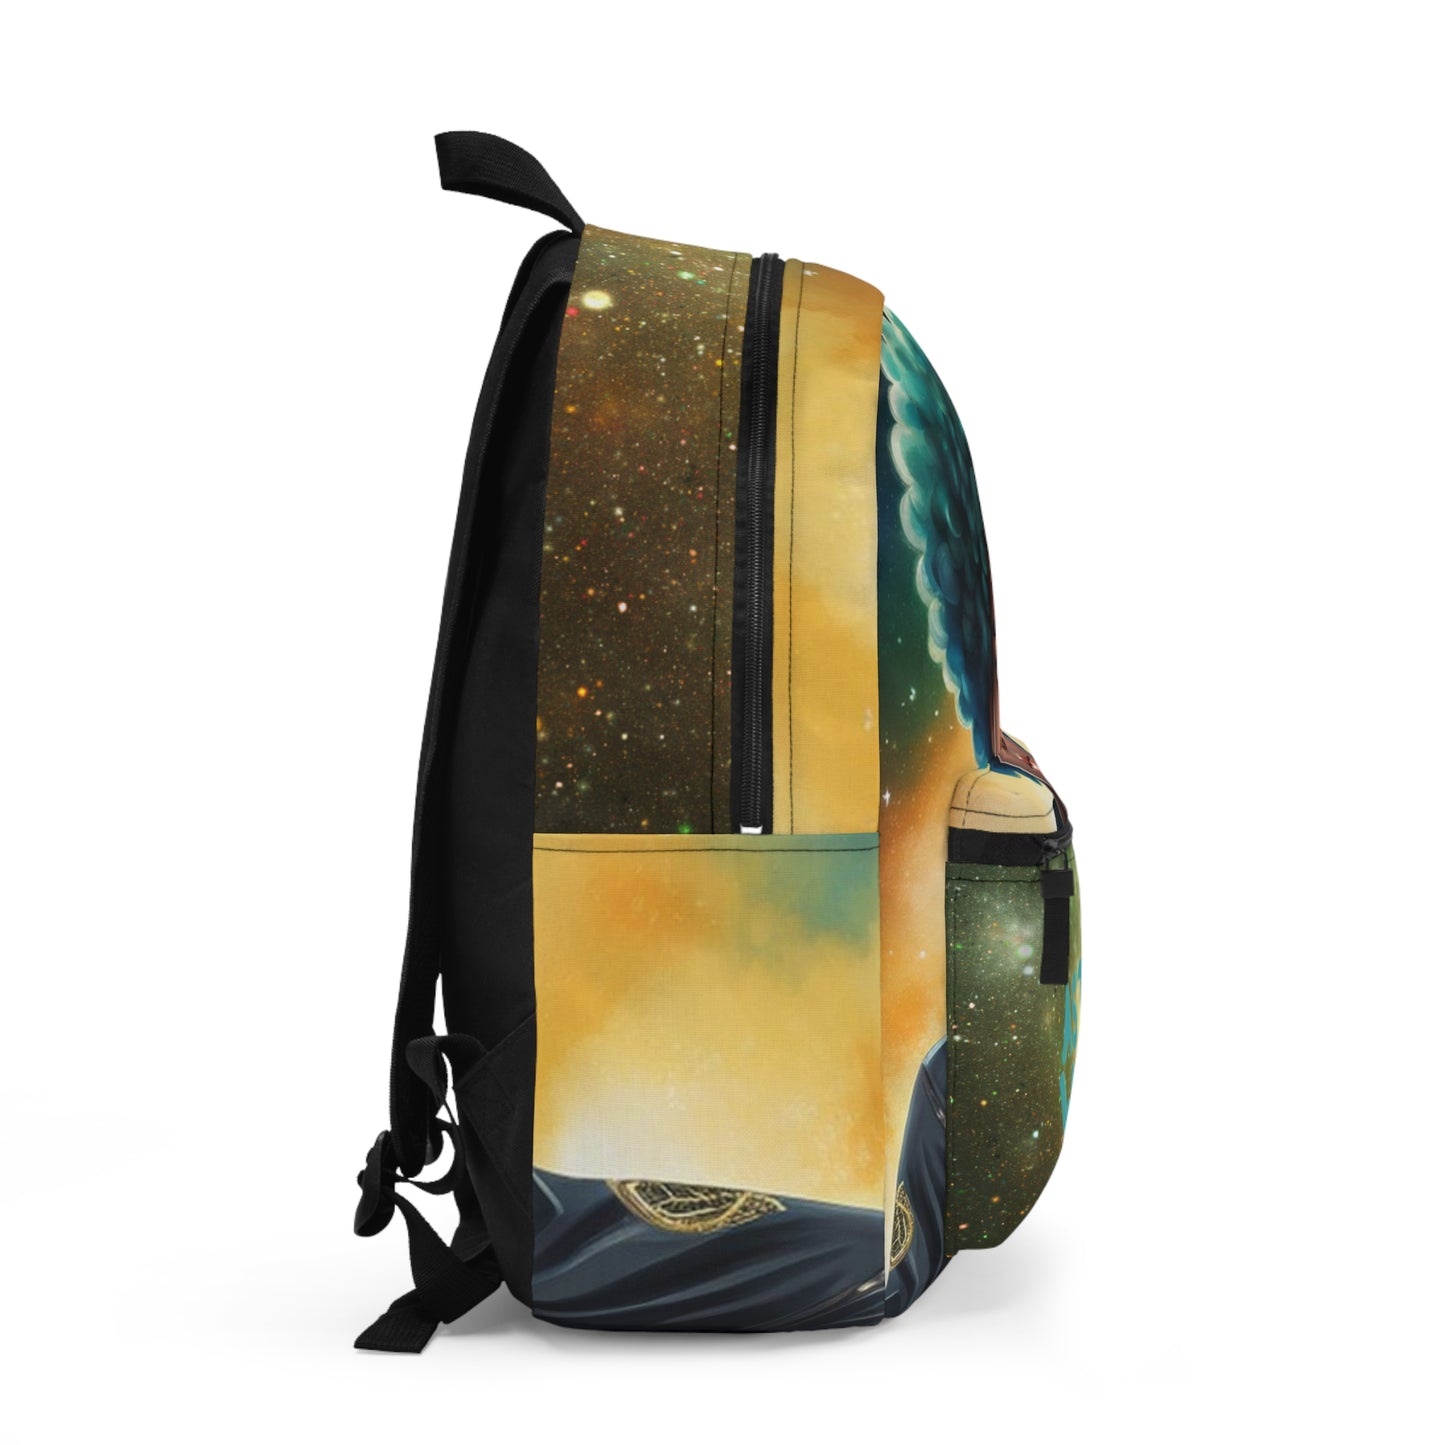 "Astro World" Backpack